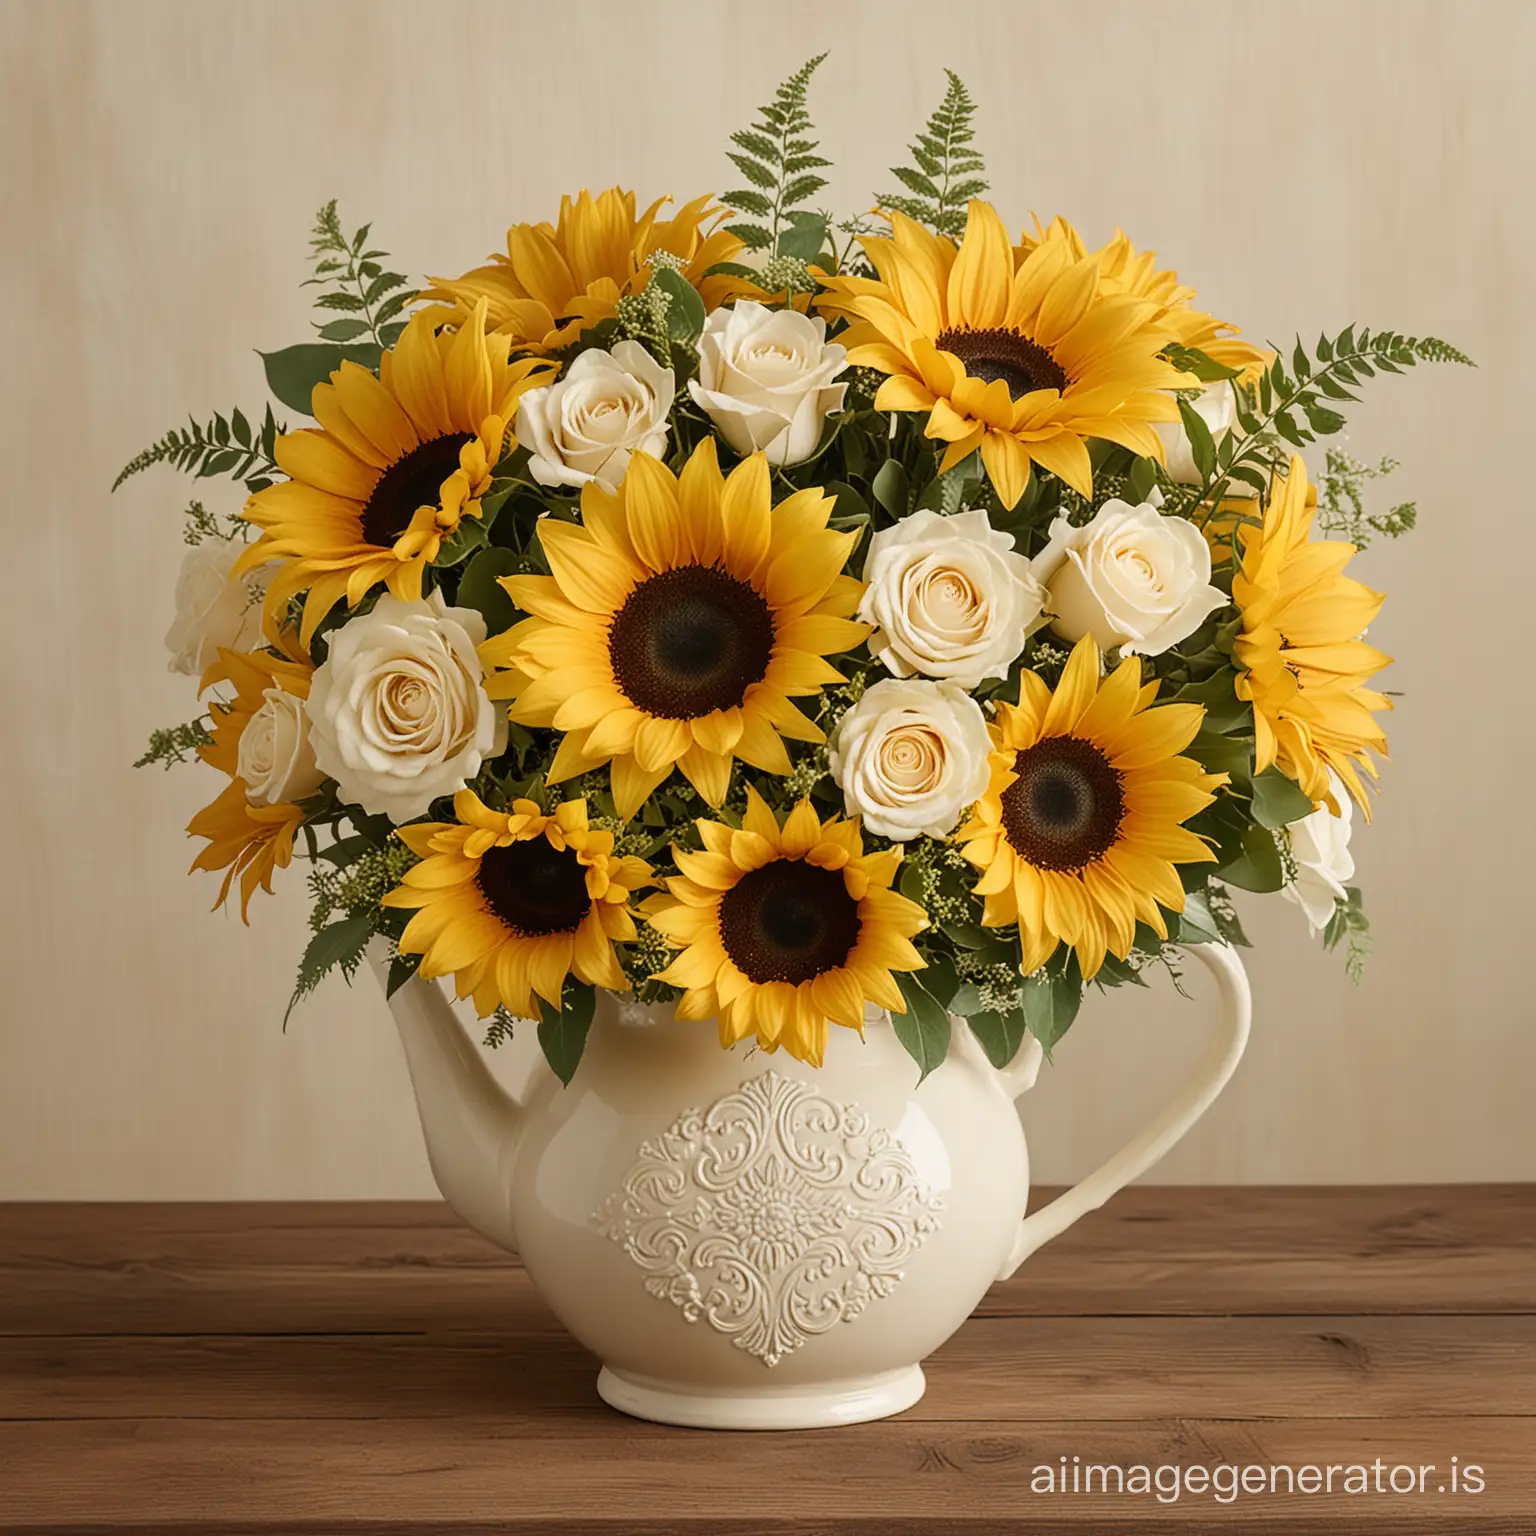 Vintage-Romance-Floral-Arrangement-Sunflowers-and-Ivory-Roses-in-Antique-Pitcher